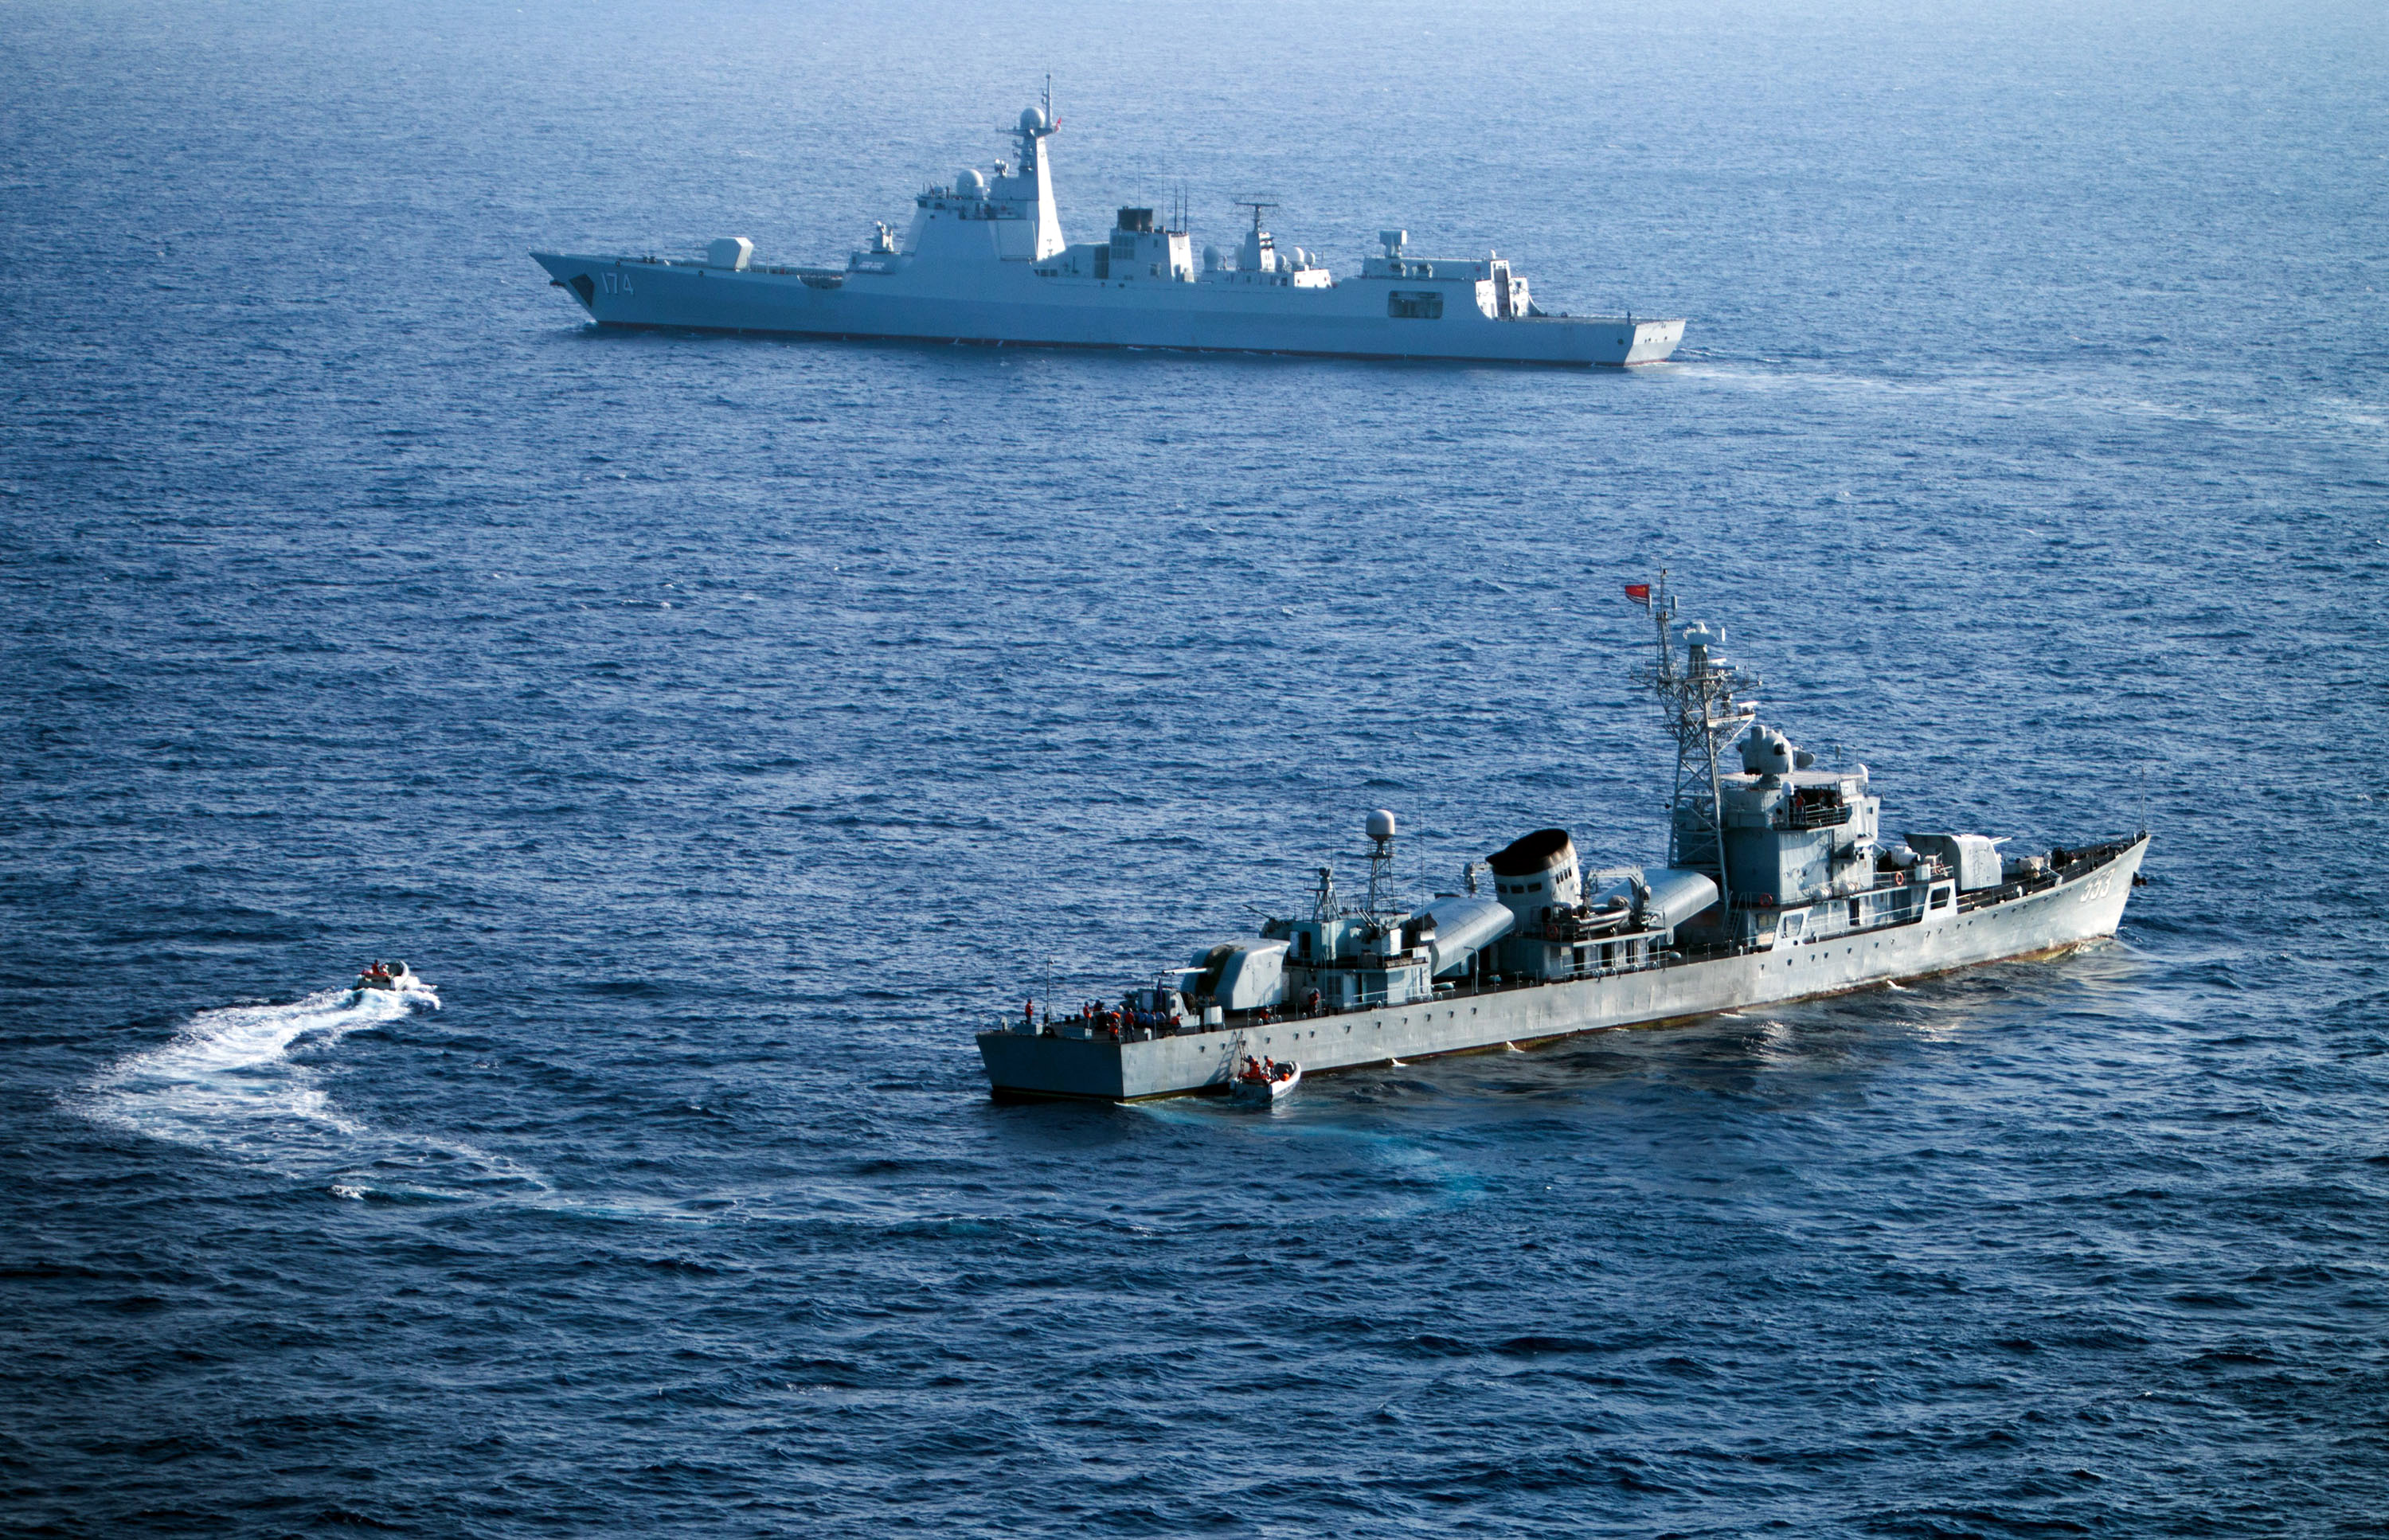 (FILES) This file photo taken on May 5, 2016 shows crew members of China's South Sea Fleet taking part in a drill in the Xisha Islands, or the Paracel Islands in the South China Sea. China warned Washington January 24, 2017 that it would not back down over its claims in the disputed South China Sea, following vows by the Trump administration to defend US and international interests there. / AFP PHOTO / STR / China OUT